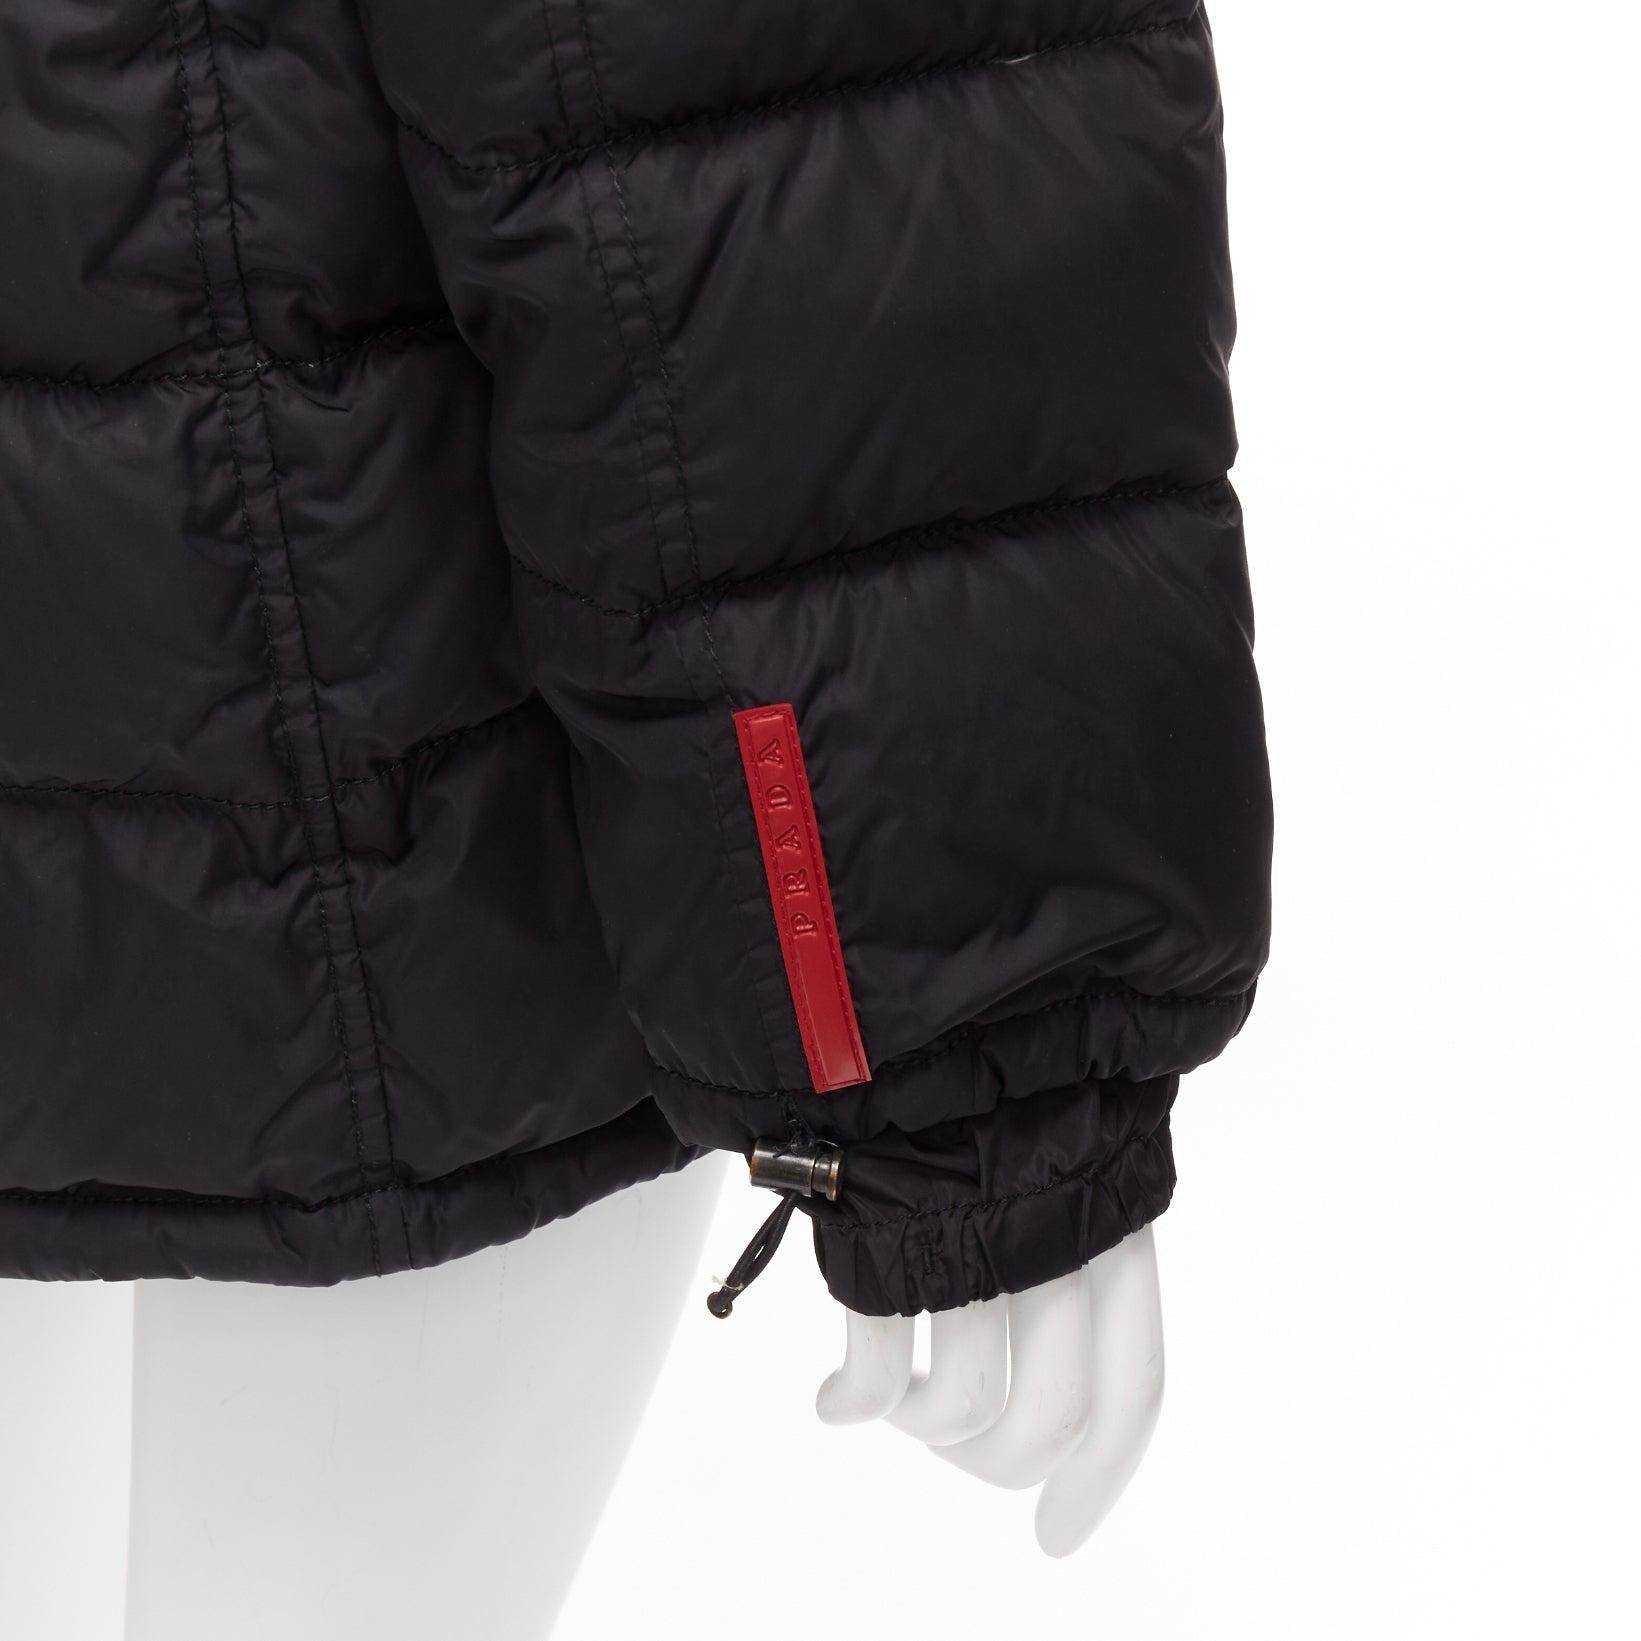 PRADA Sports black nylon 100% down filled hooded puffer jacket IT40 S
Reference: CNPG/A00068
Brand: Prada
Designer: Miuccia Prada
Collection: Linea Rossa
Material: Nylon
Color: Black, Red
Pattern: Solid
Closure: Zip
Lining: Black Down
Extra Details: